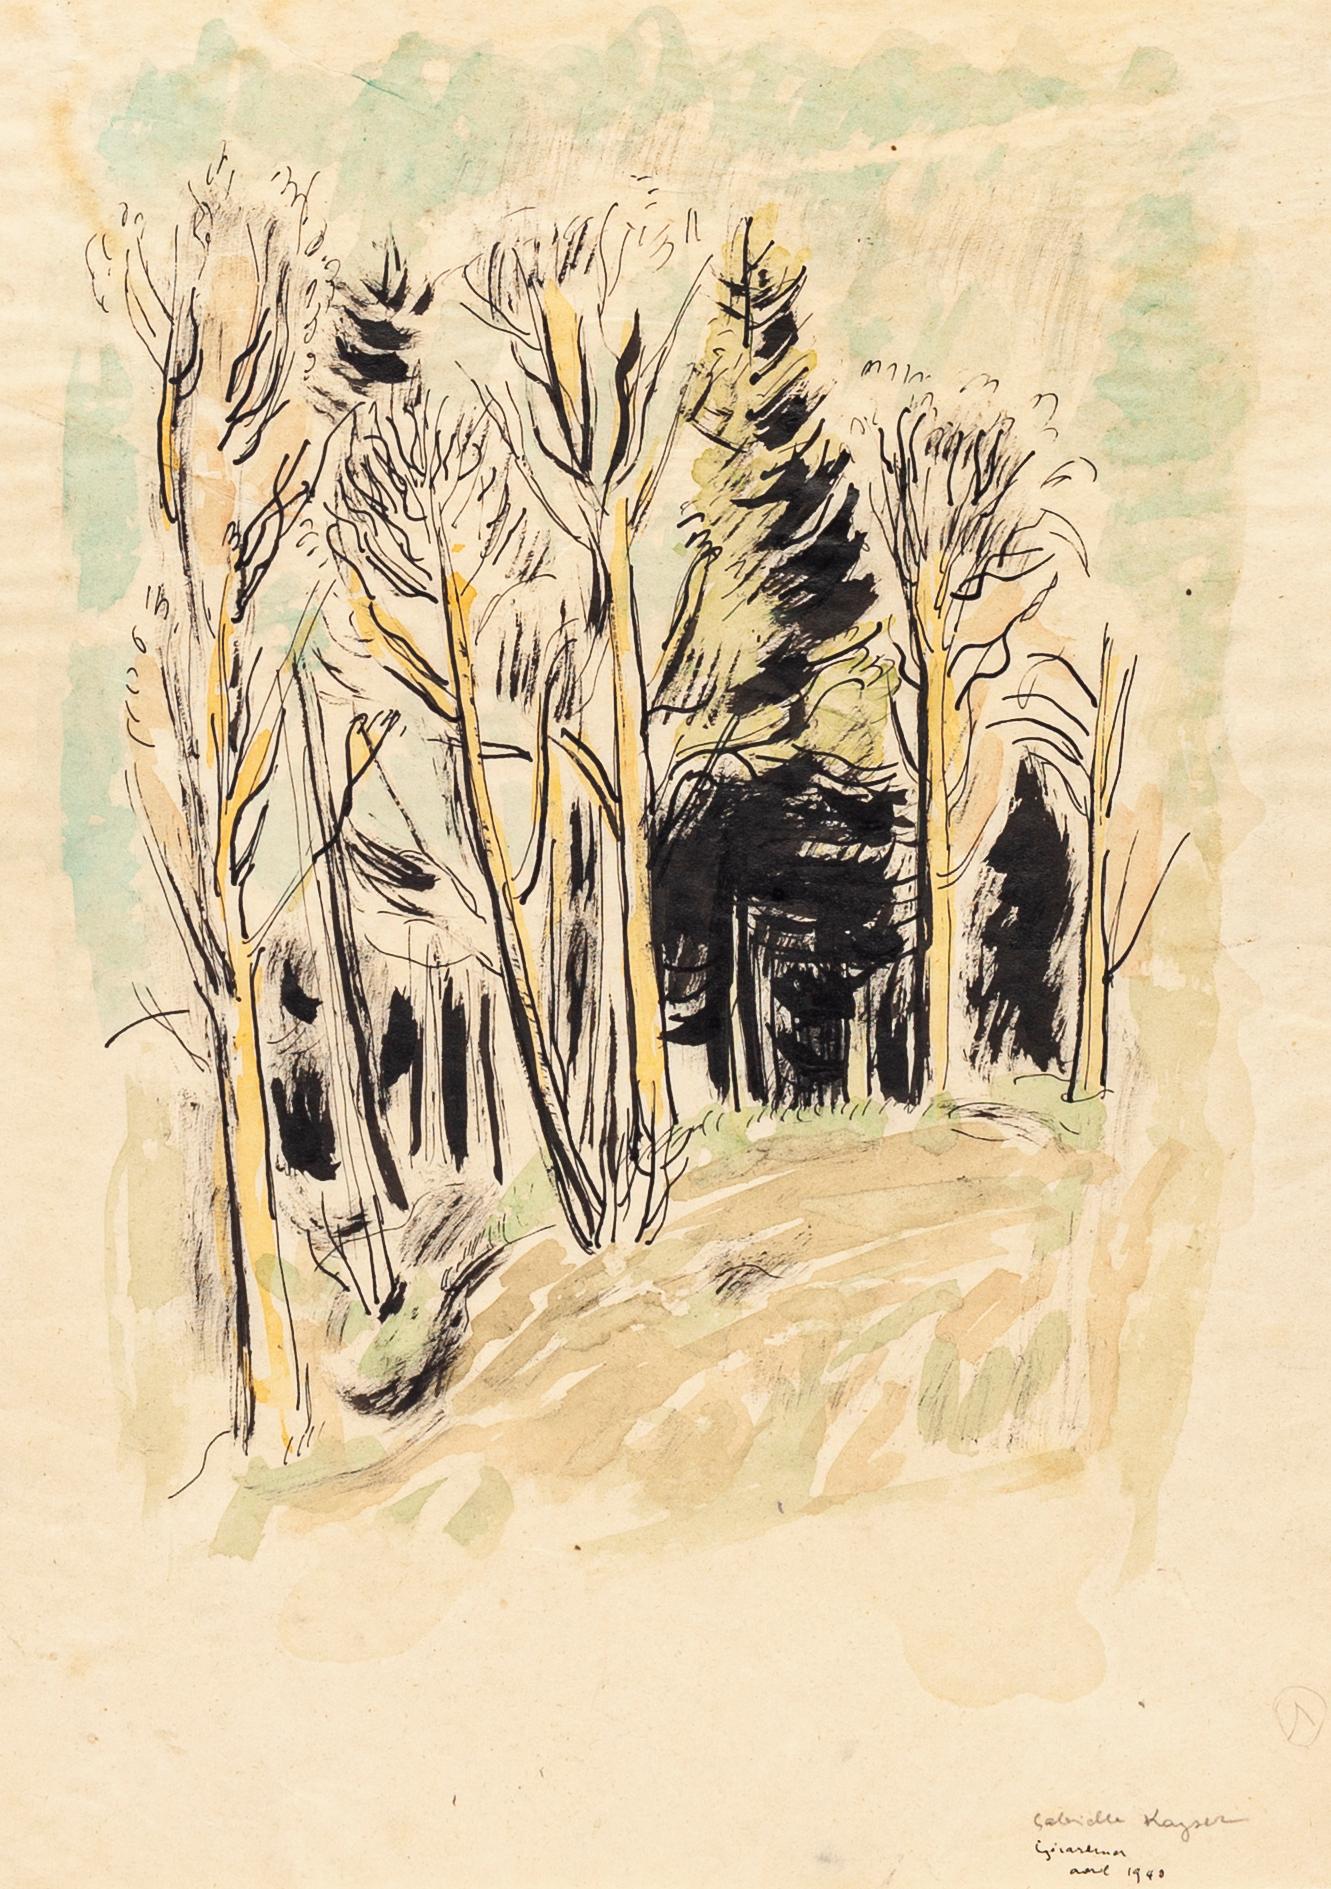 Into the Woods - China Ink and Watercolor by G. Kayser - 1948